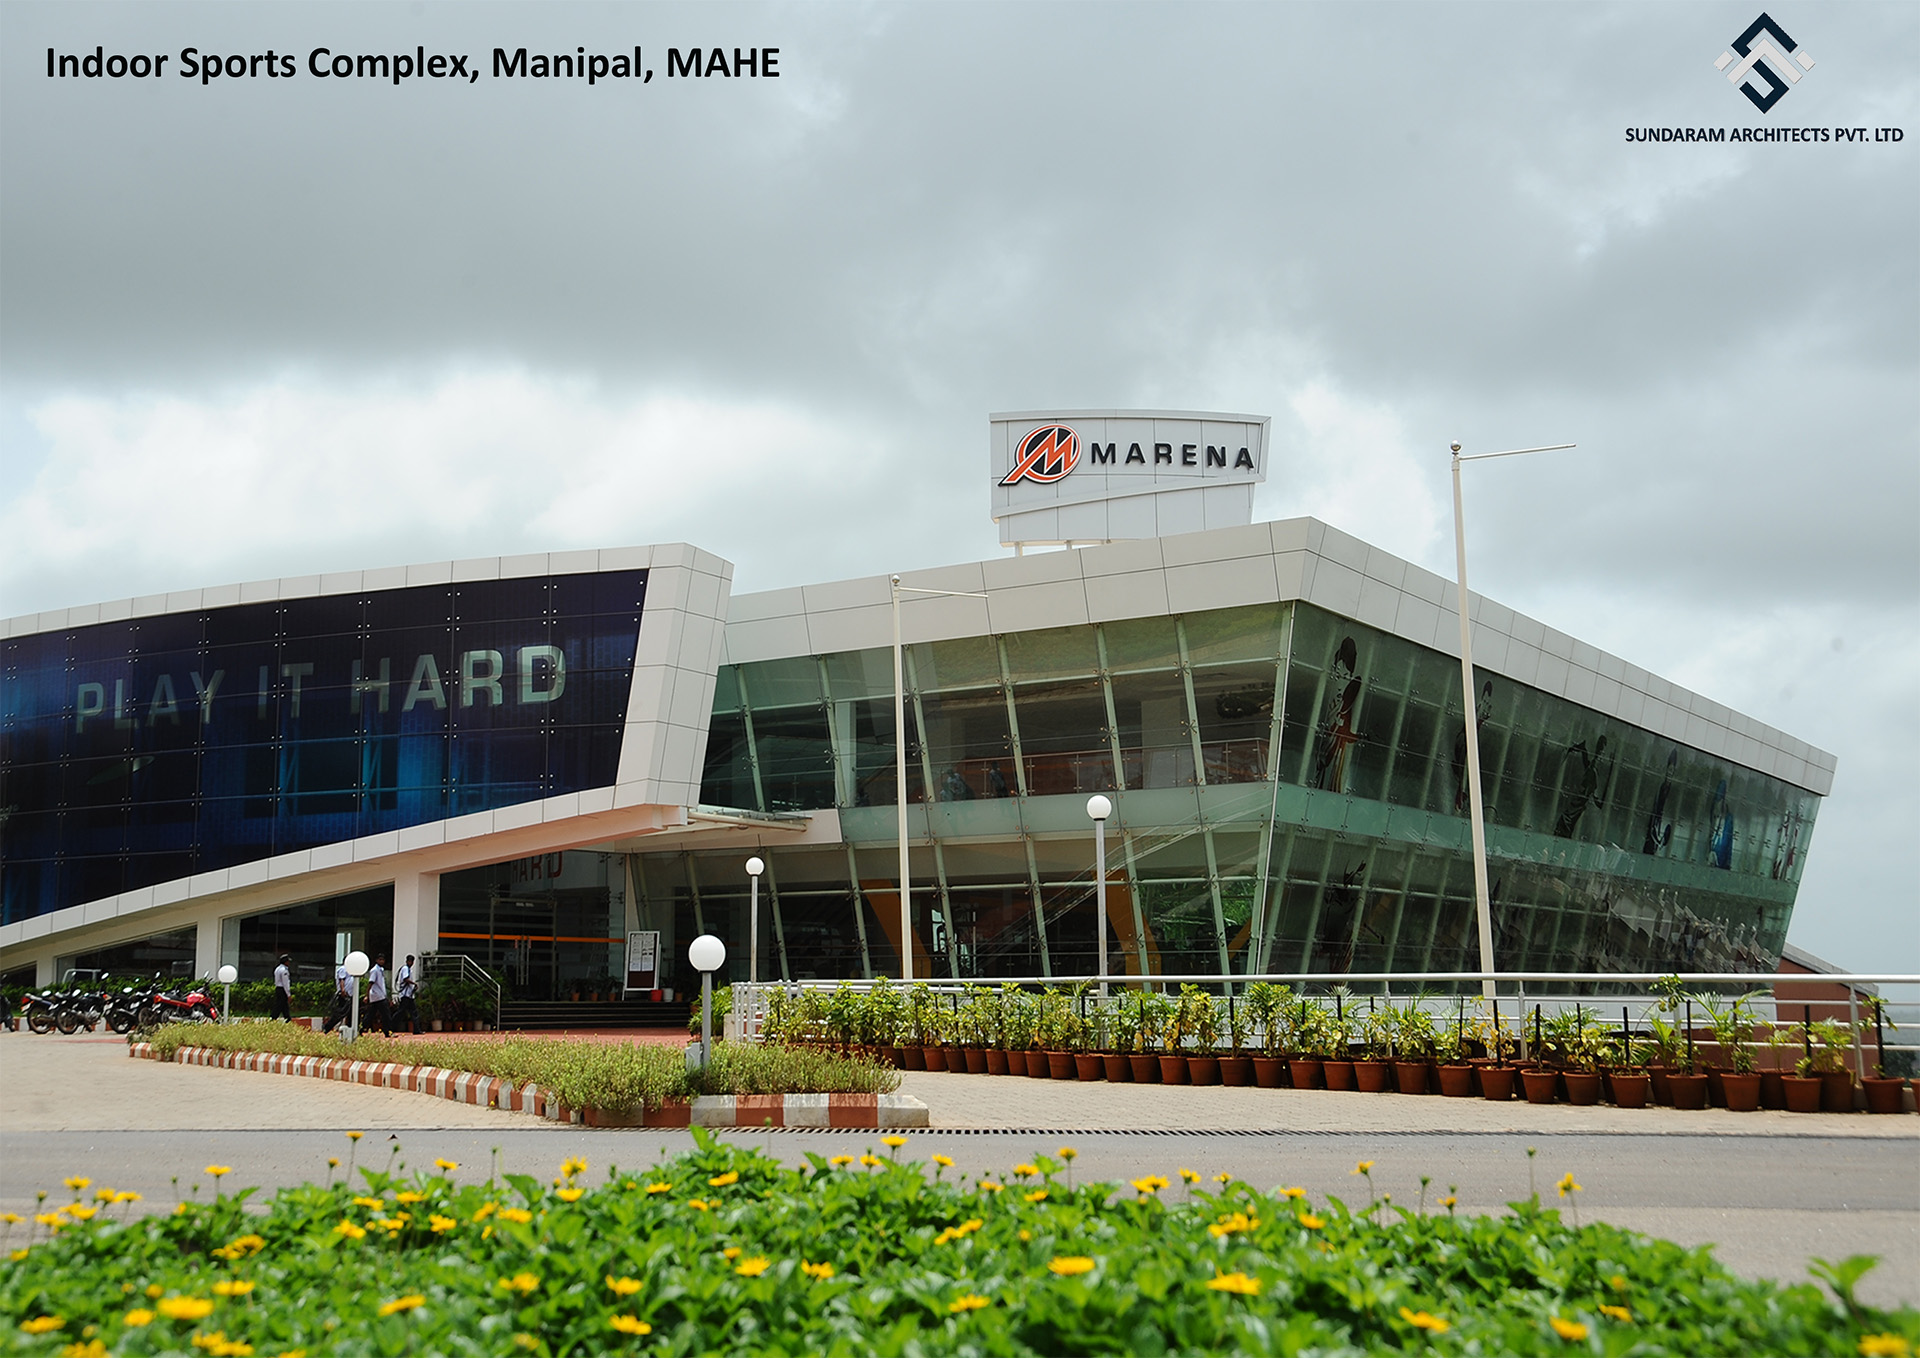 Indoor Sports Complex, Manipal, MAHE, which is well designed by Sundaram Architects